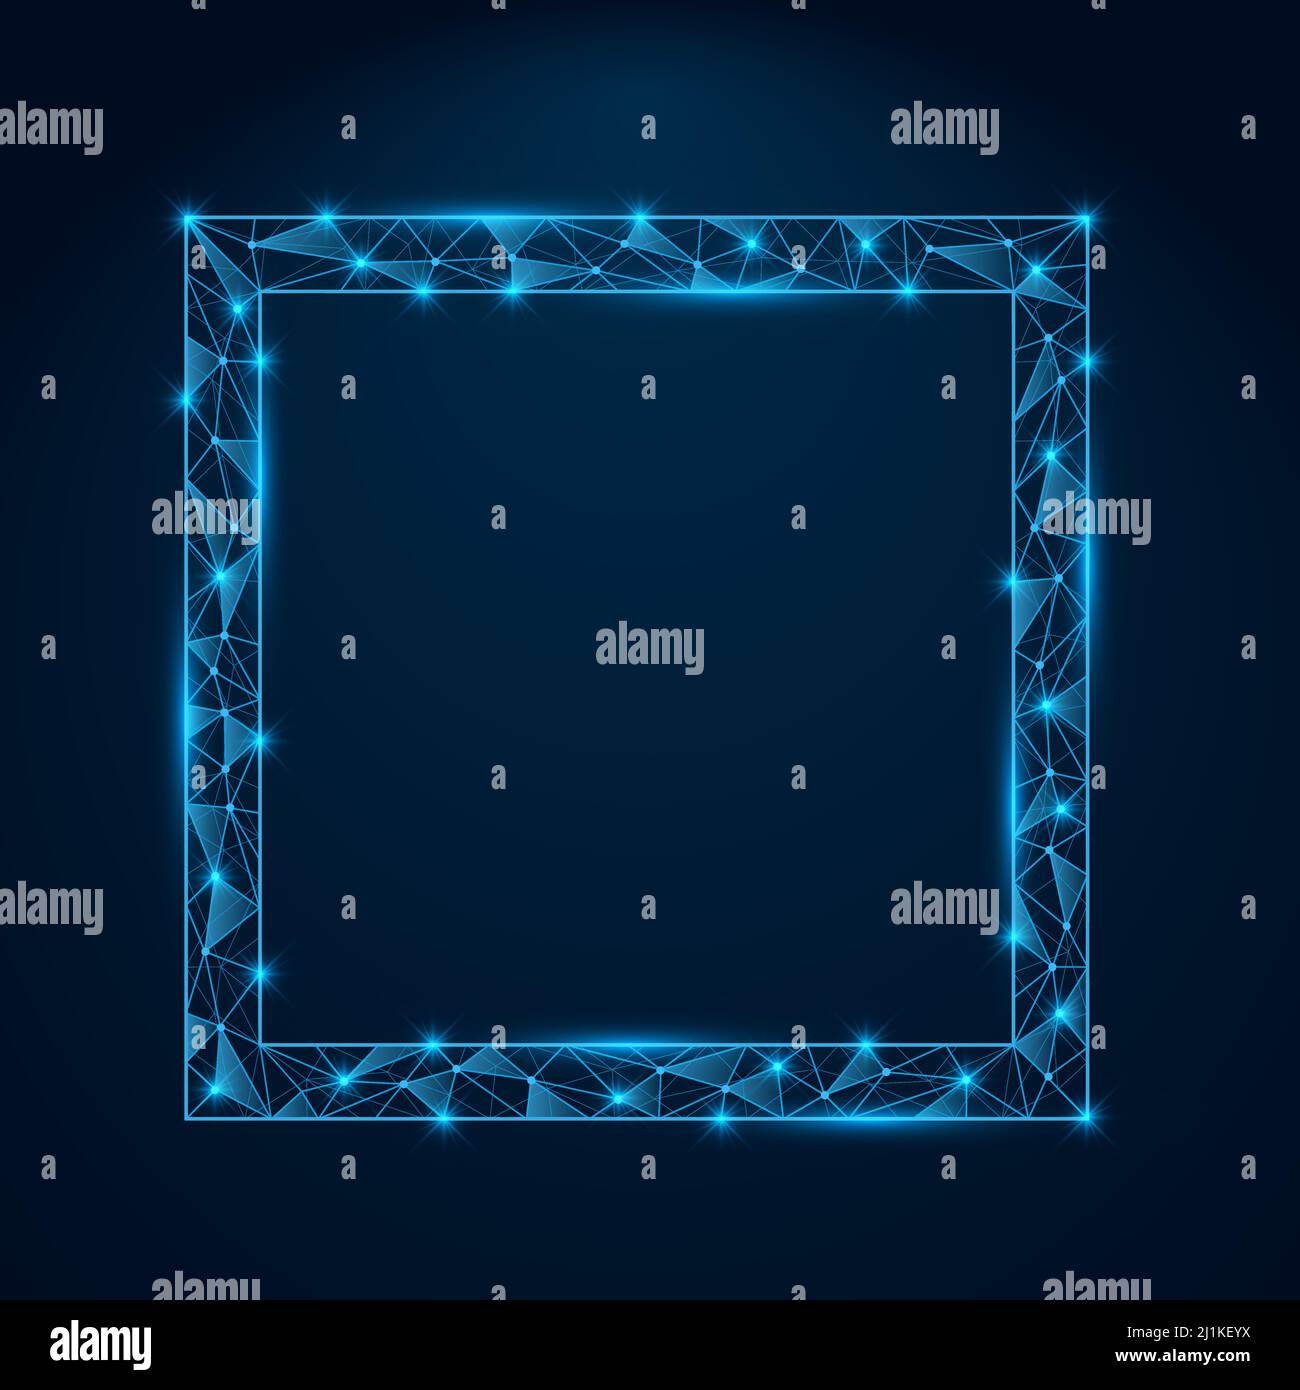 Abstract low poly blue square frame with glowing elements. Square shape with shinning connecting dots and lines. Stock Vector